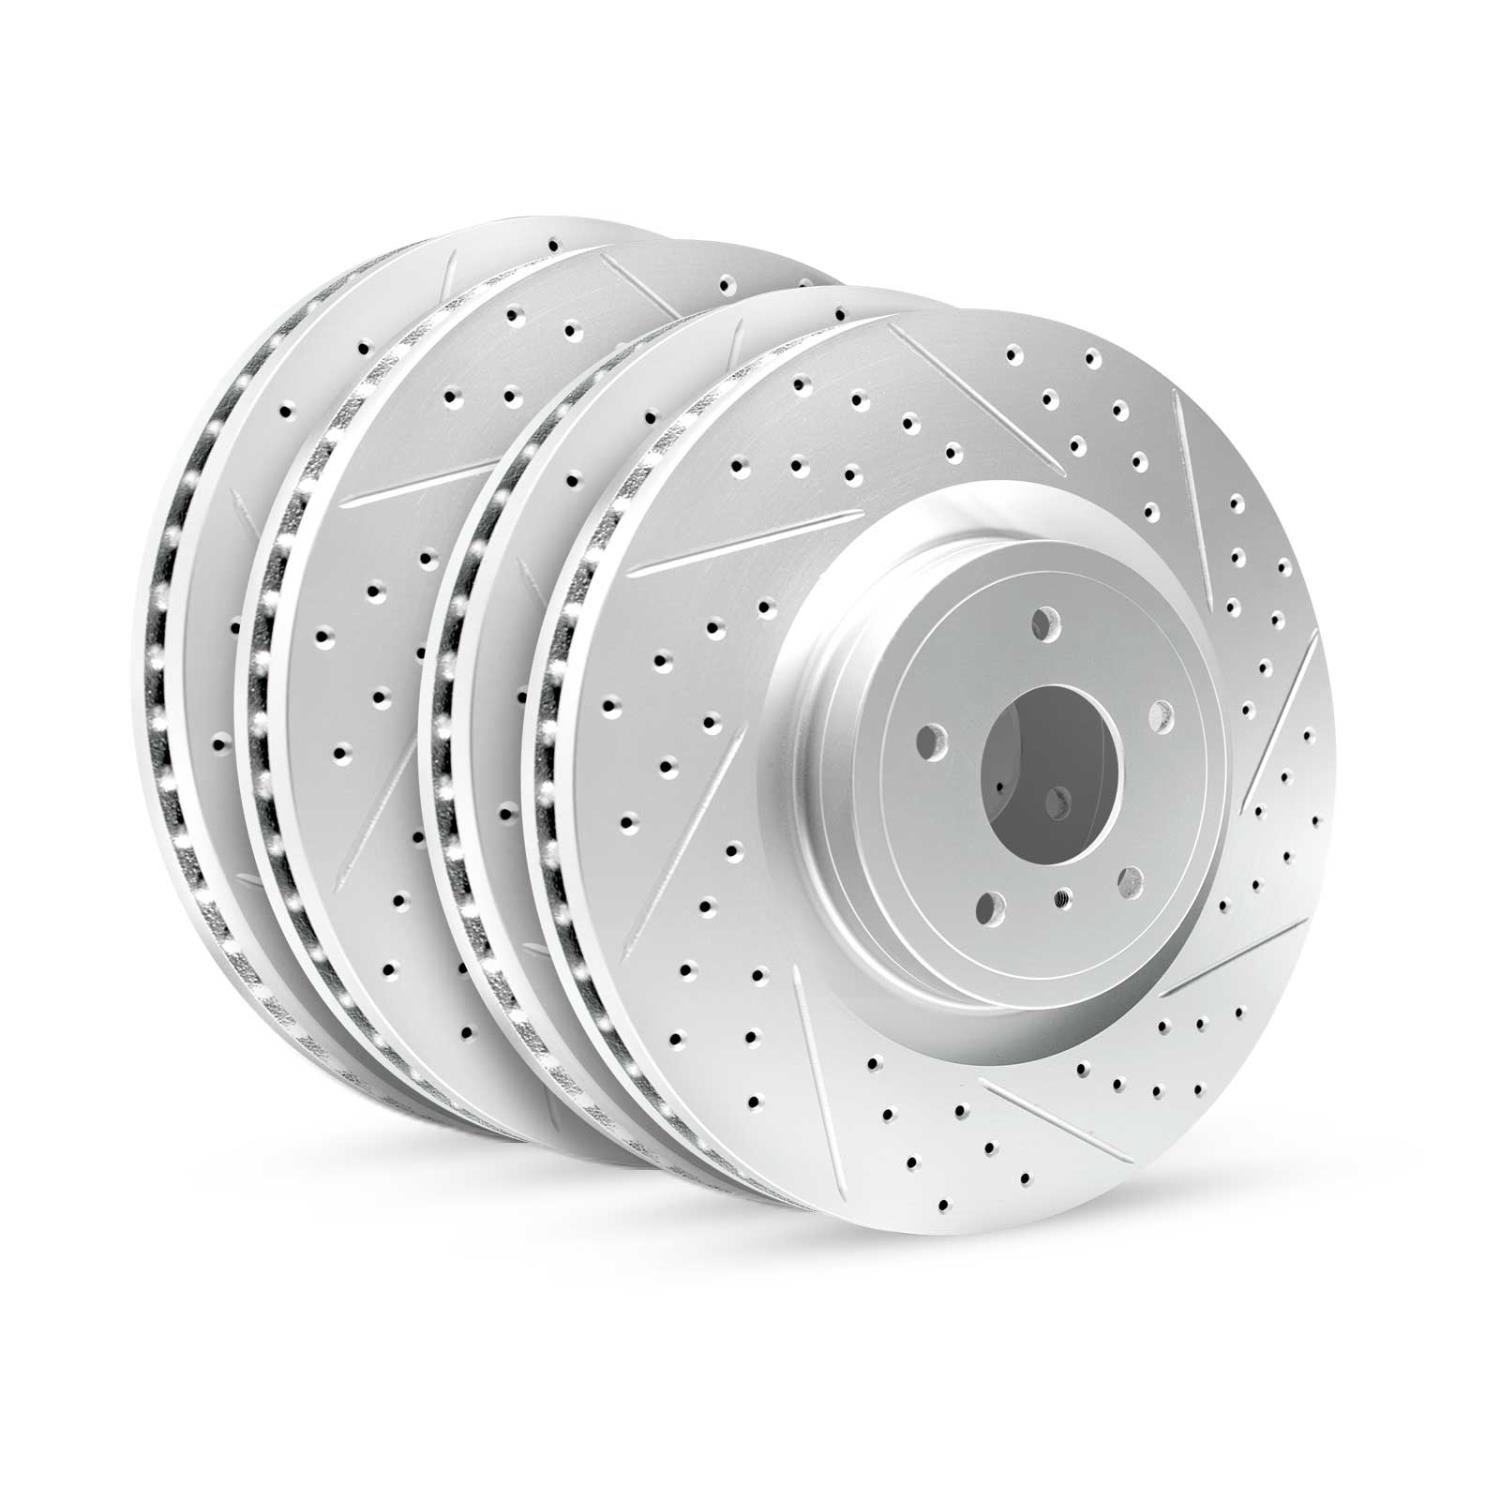 GEO-Carbon Drilled/Slotted Rotors, 2000-2006 Fits Multiple Makes/Models, Position: Front/Rear